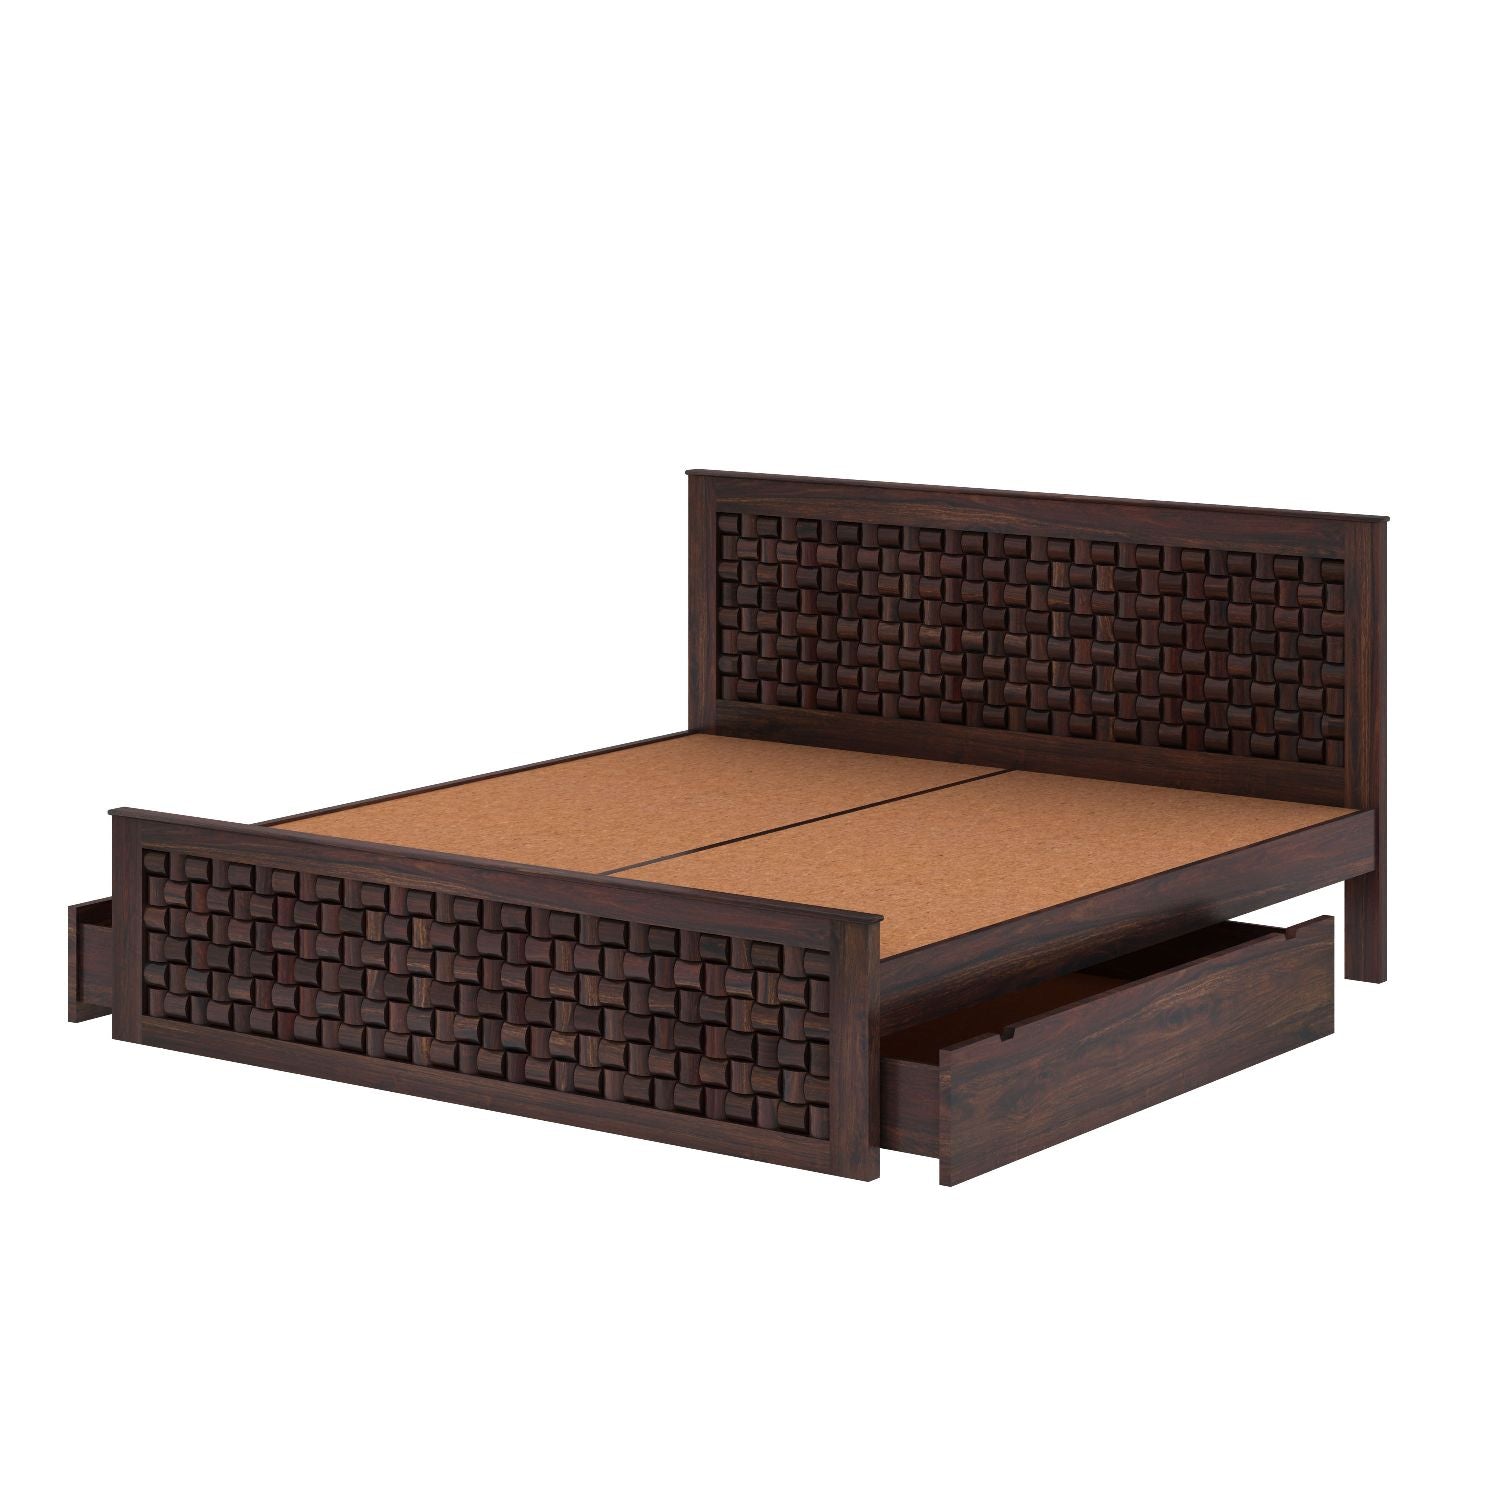 Olivia Solid Sheesham Wood Bed With Two Drawers (King Size, Walnut Finish)